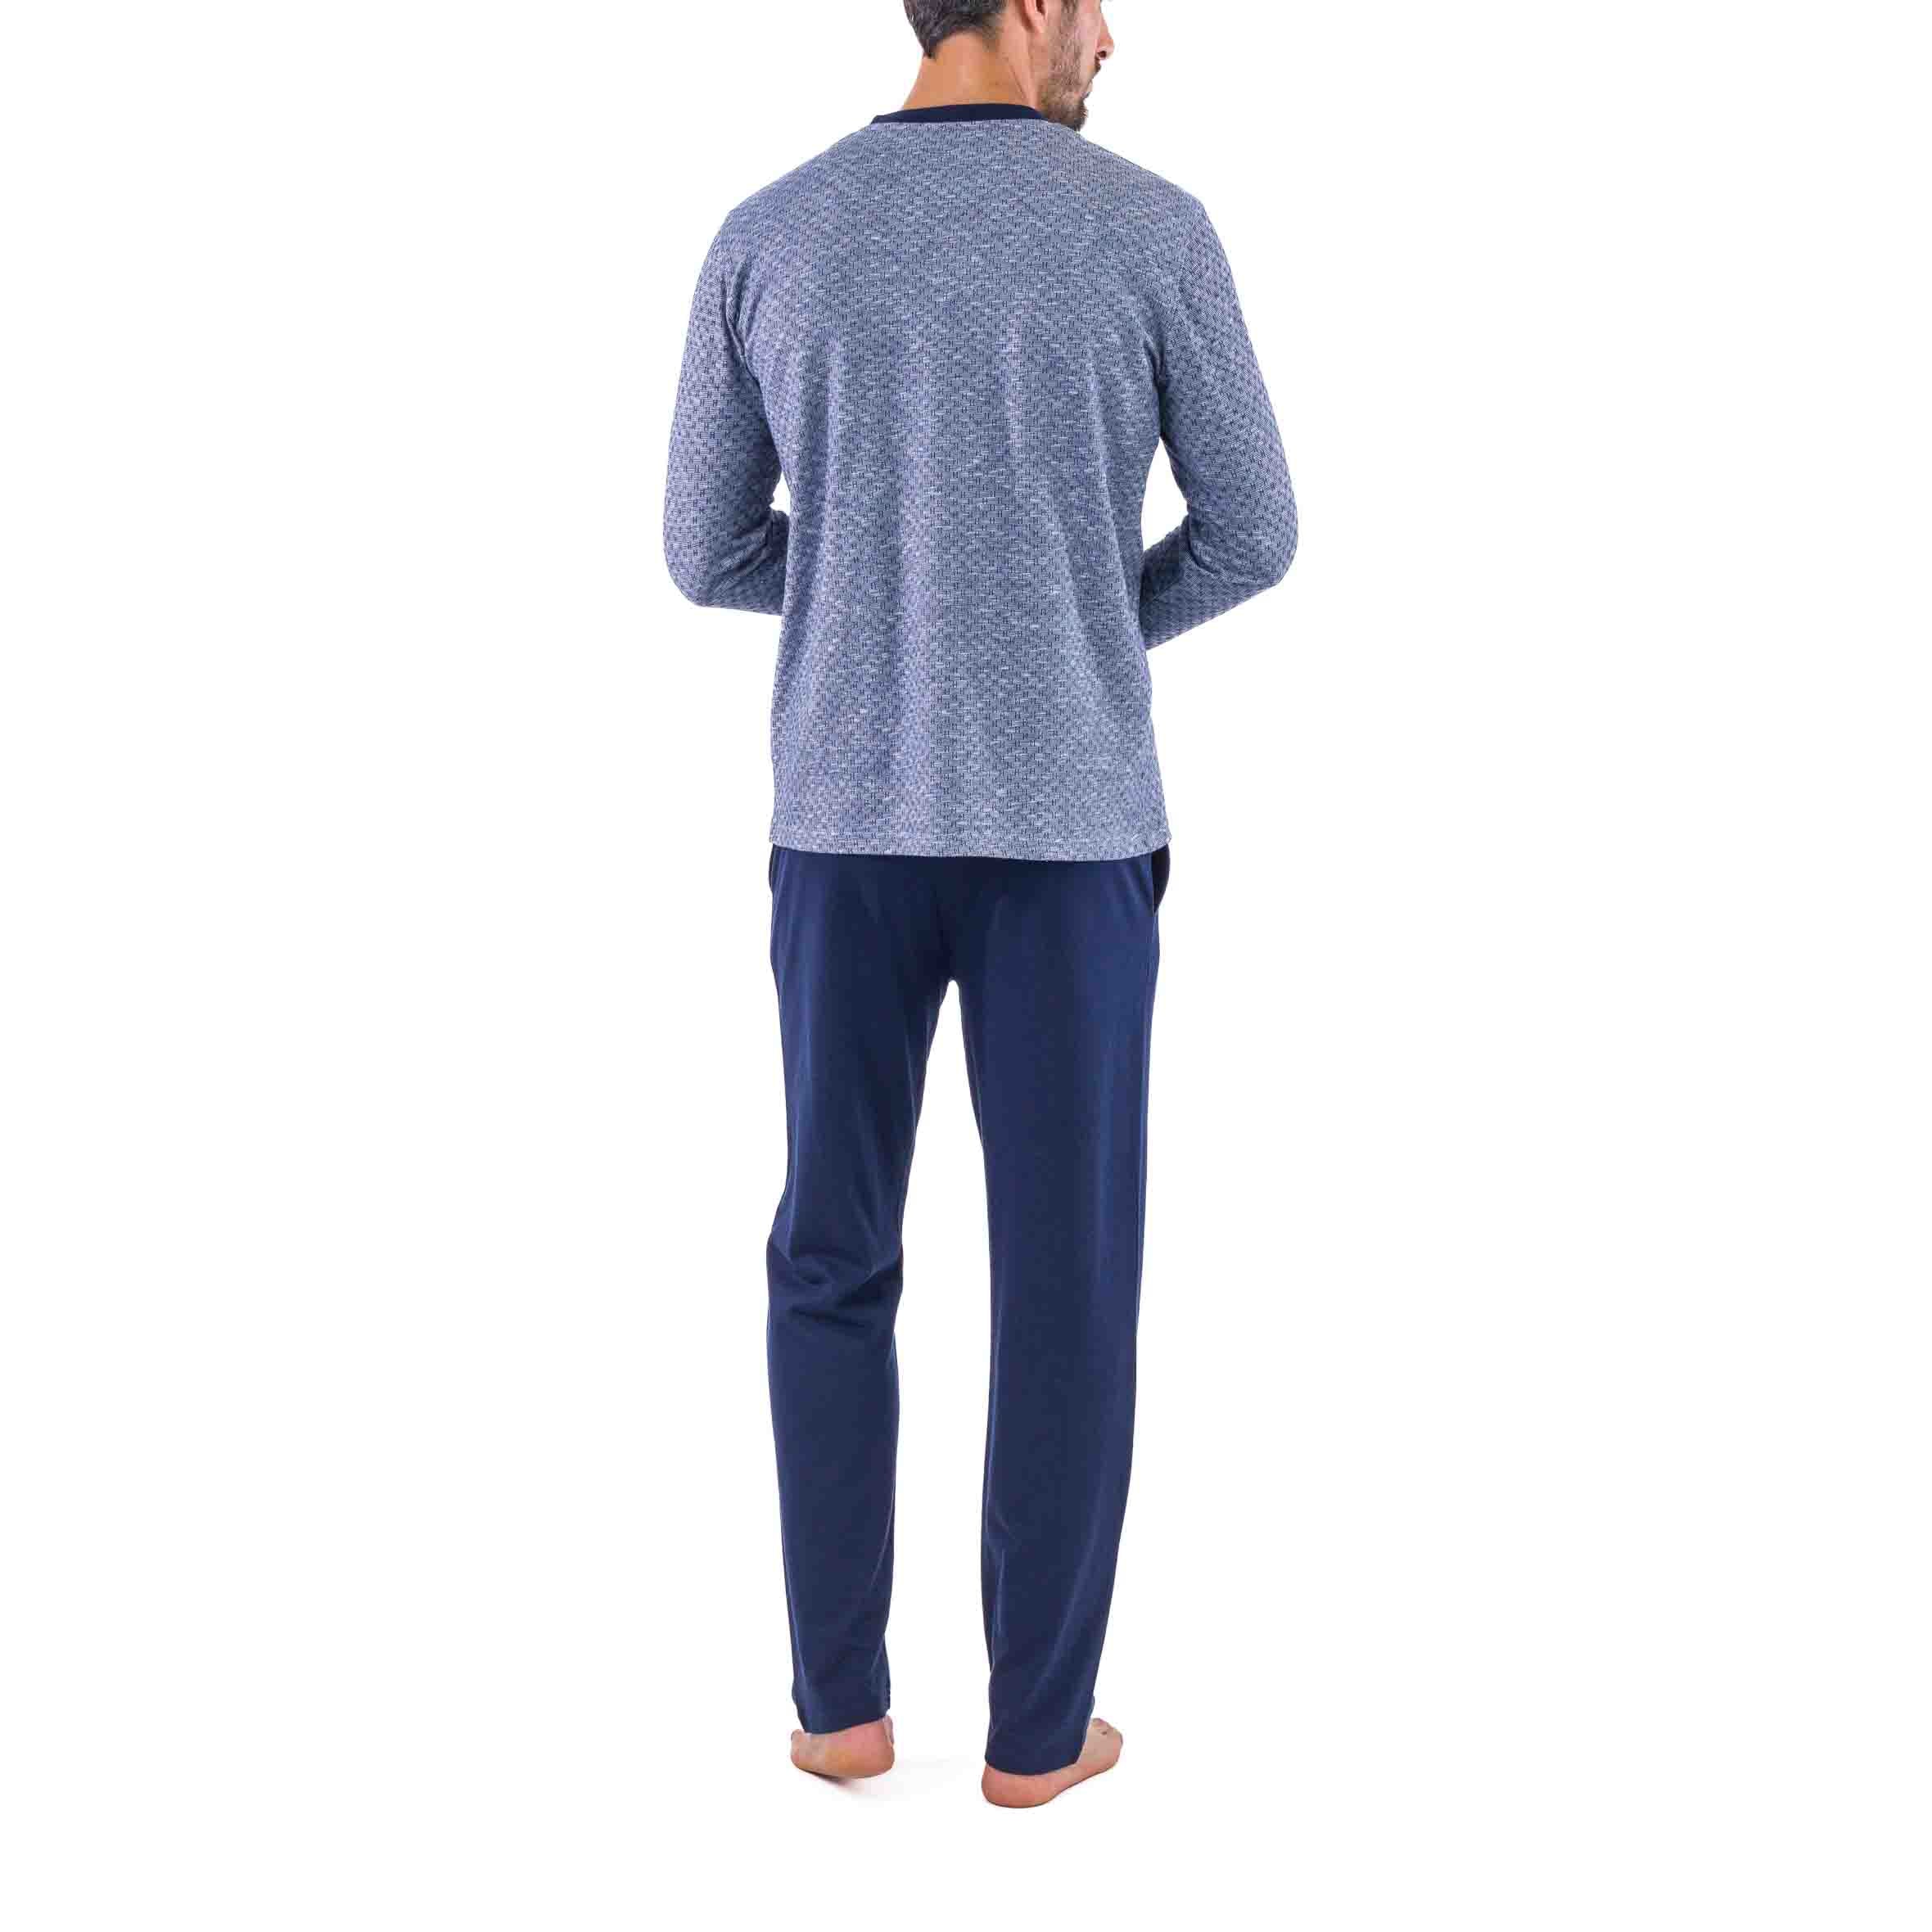 Navy Jacquard Knit Cotton Jersey Pajamas with Buttoned Collar